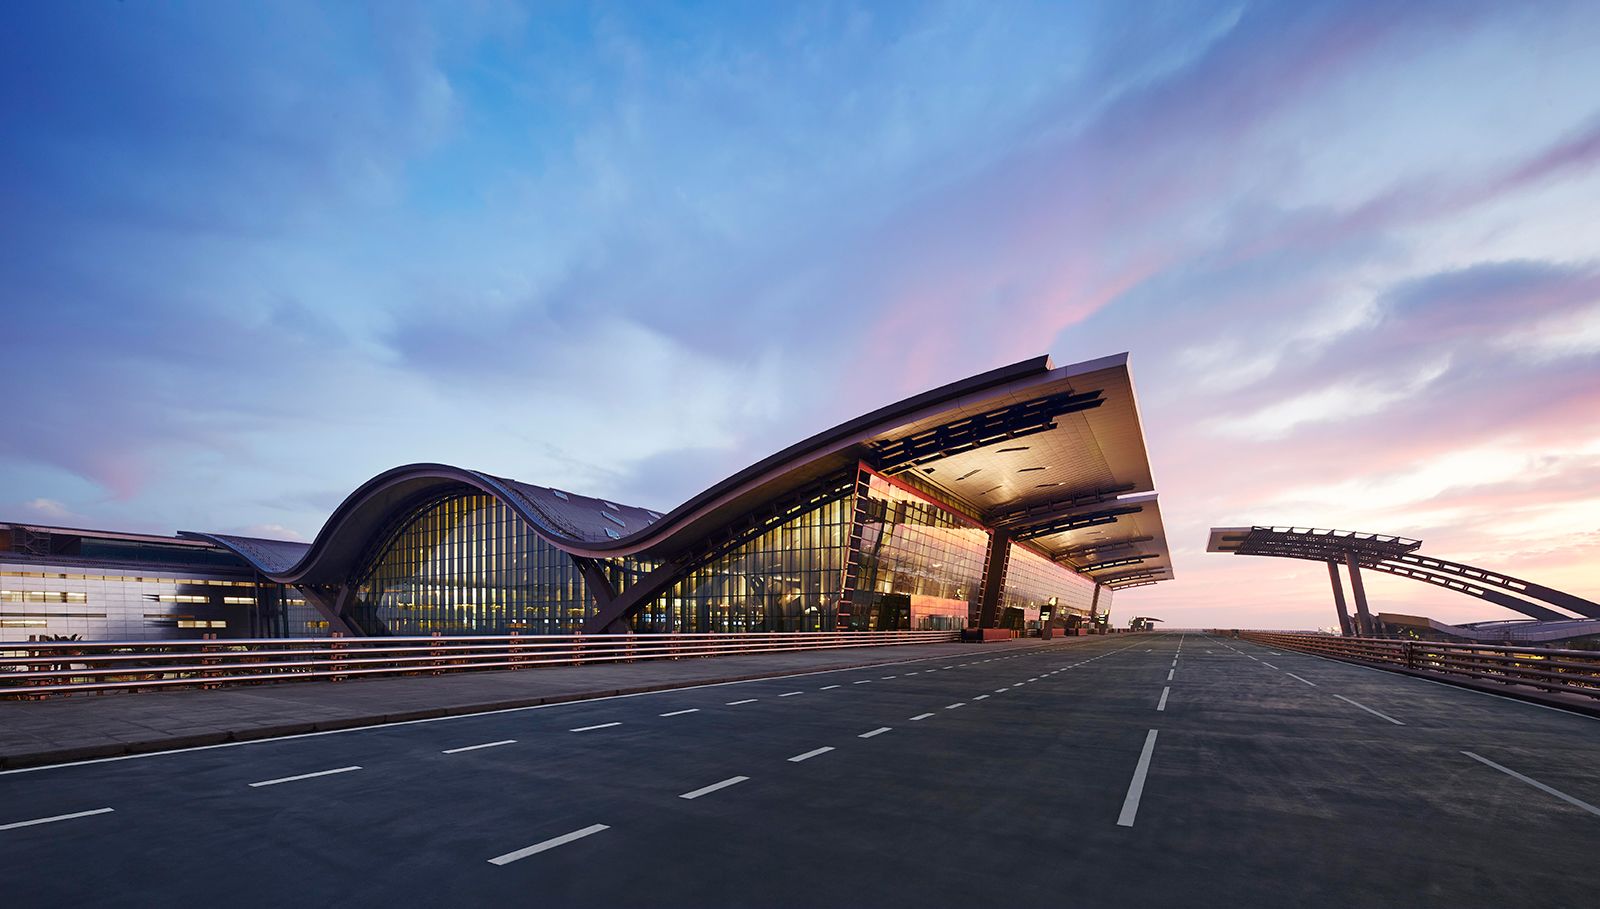 Hamad International Airport Is Officially the Best Airport in the World